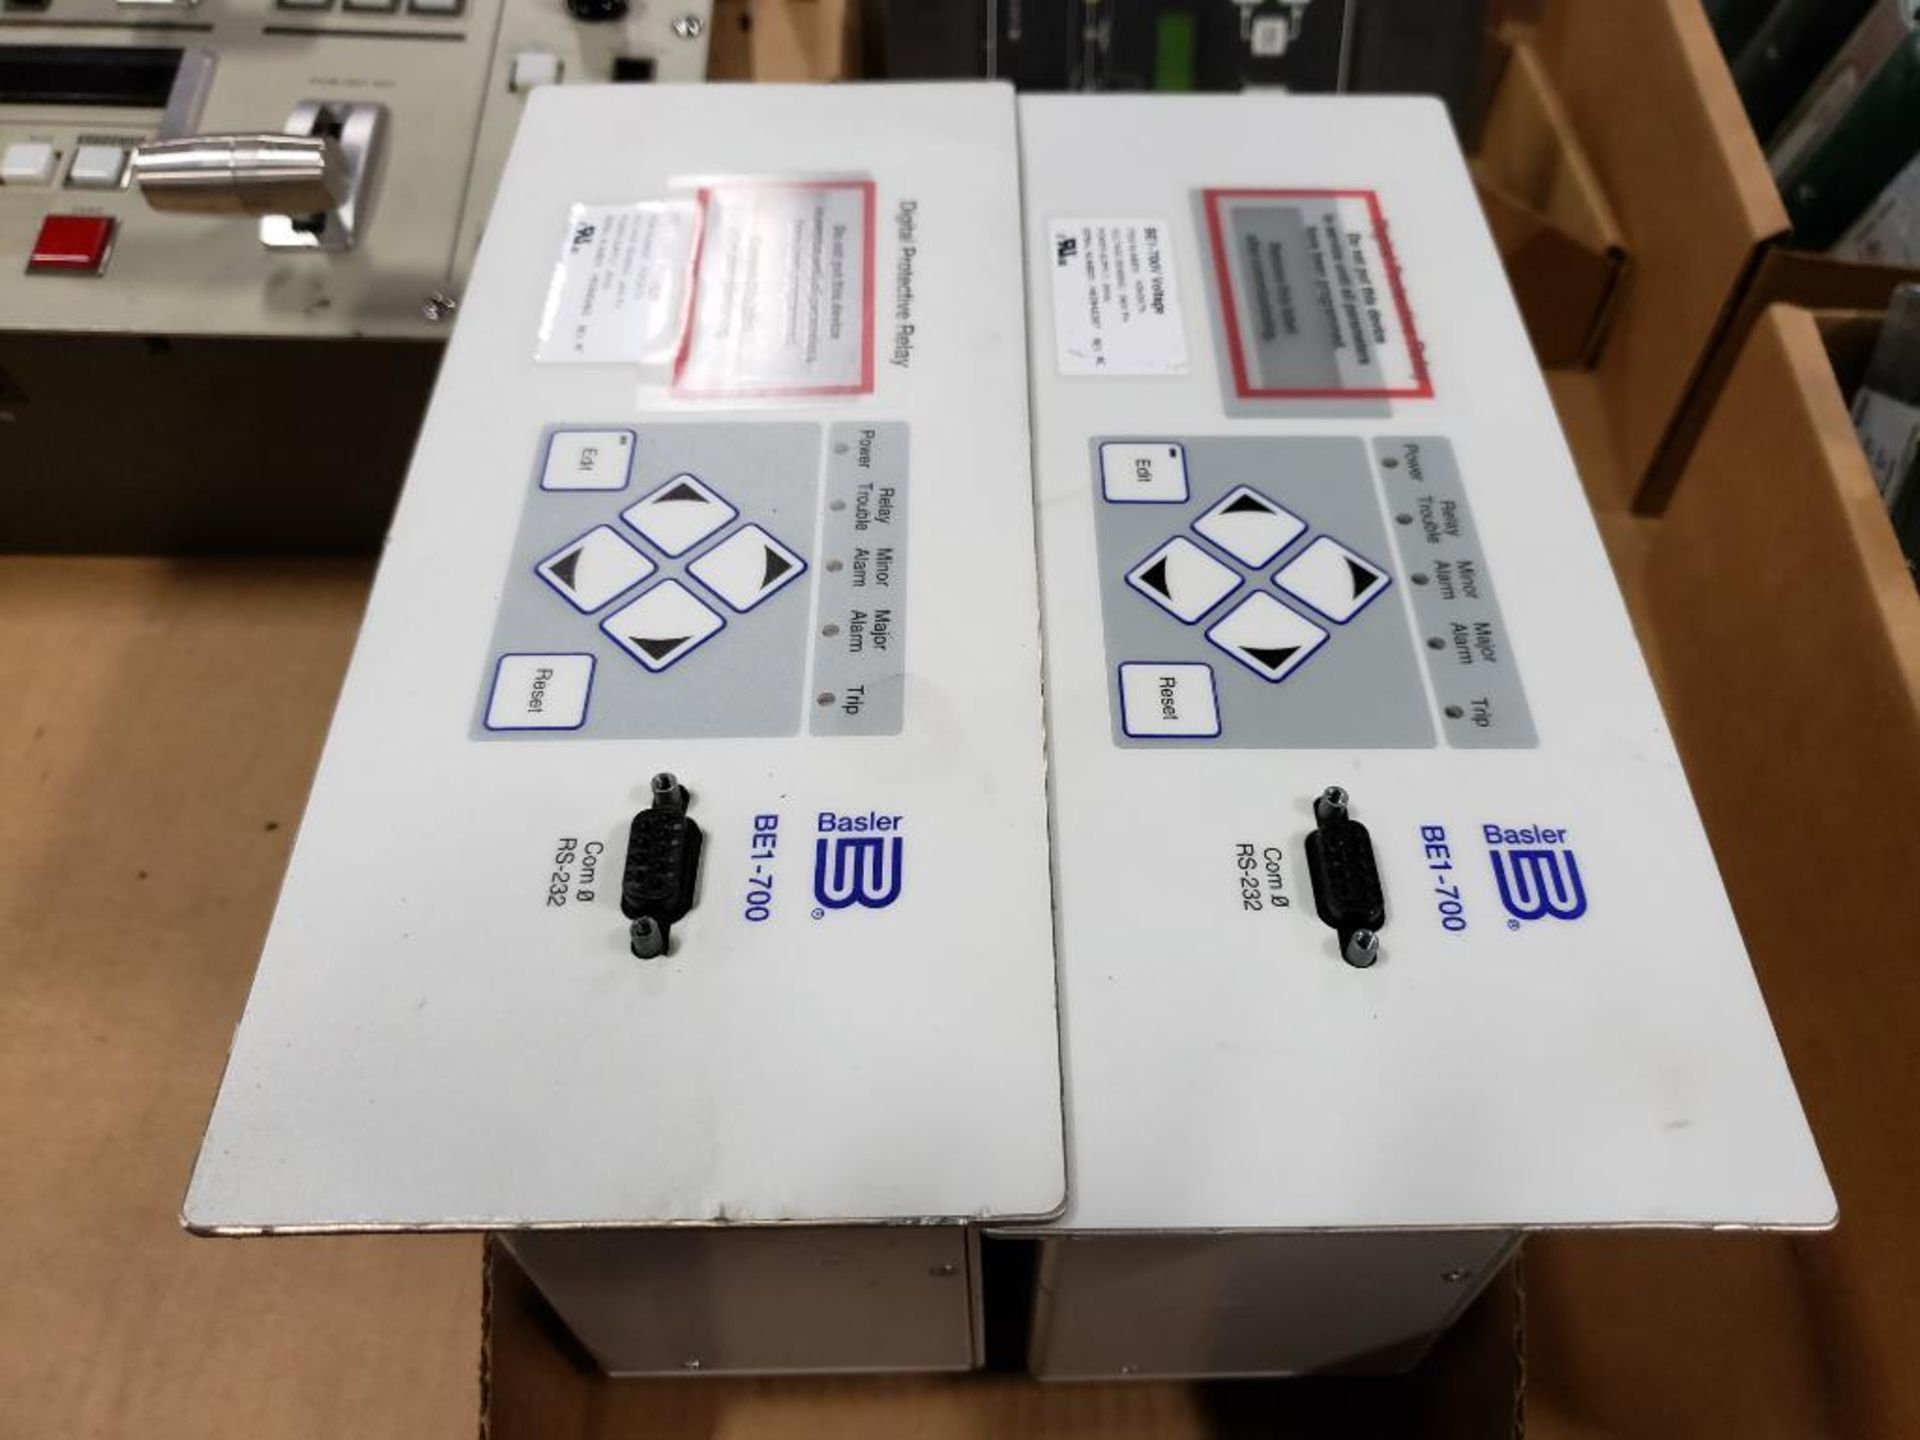 Qty 2 - Basler BE1-700 digital protective relay.